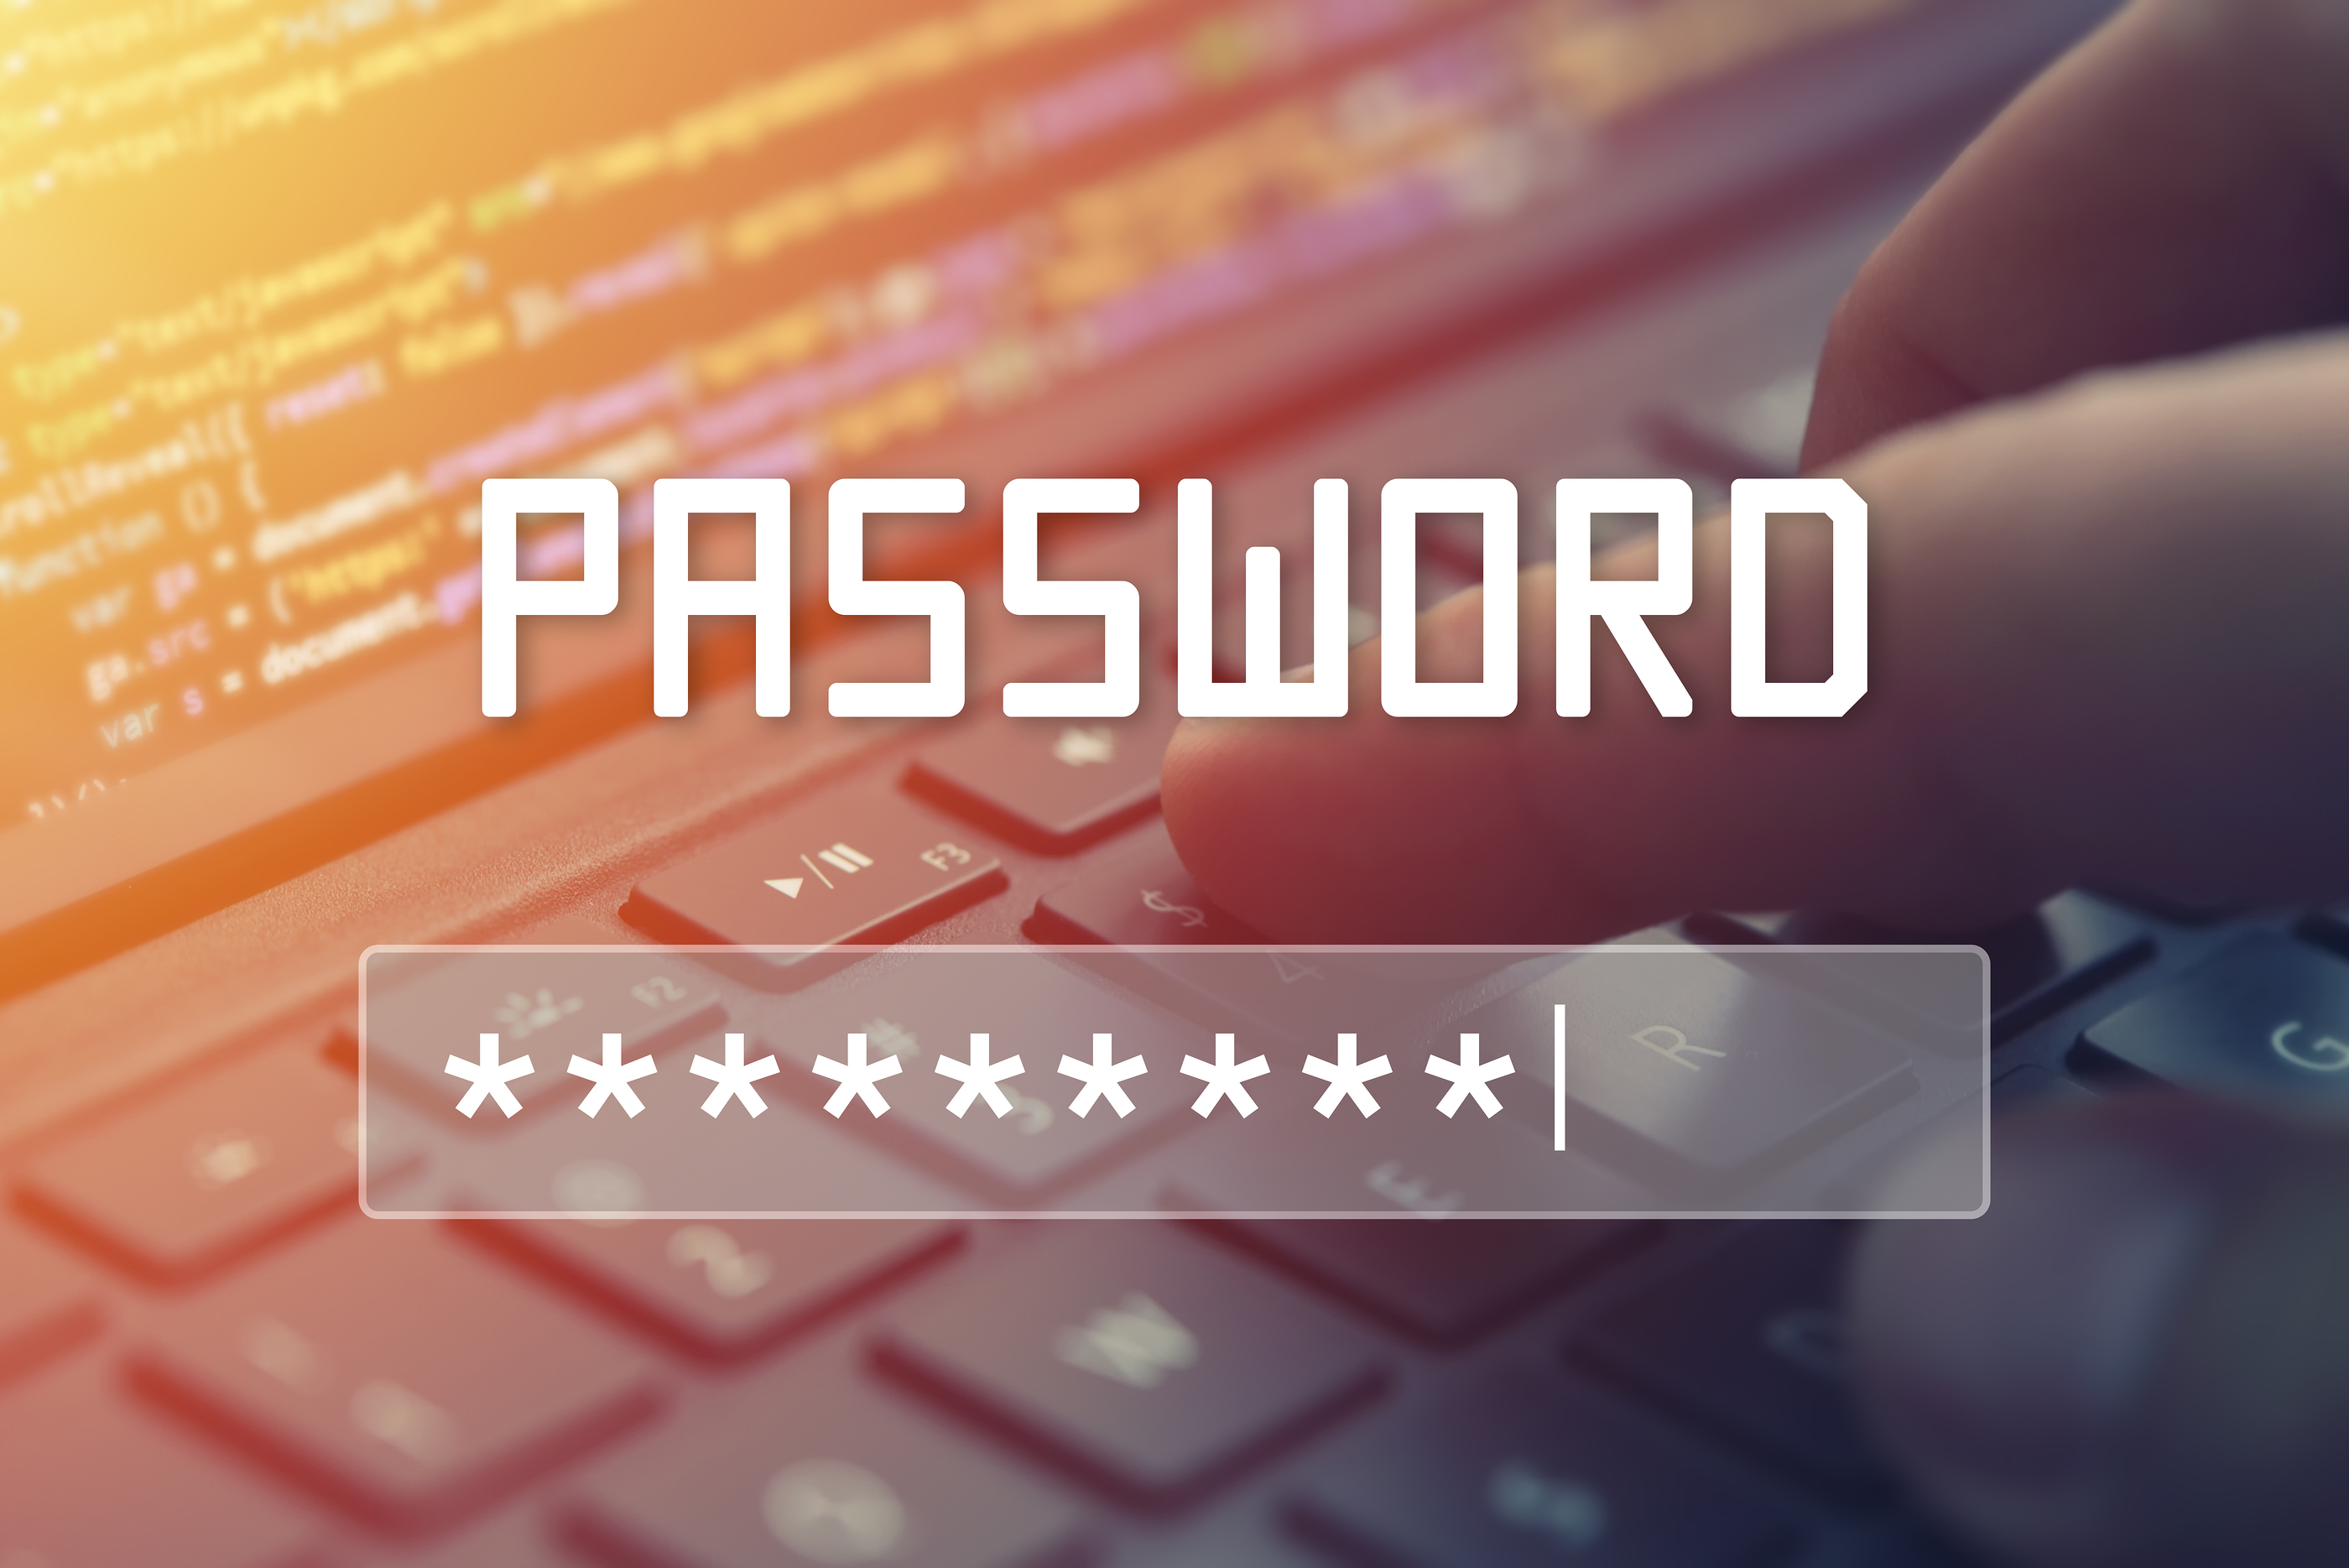 5 Eye-Opening Reasons You Should Never Let Your Browser Store Passwords